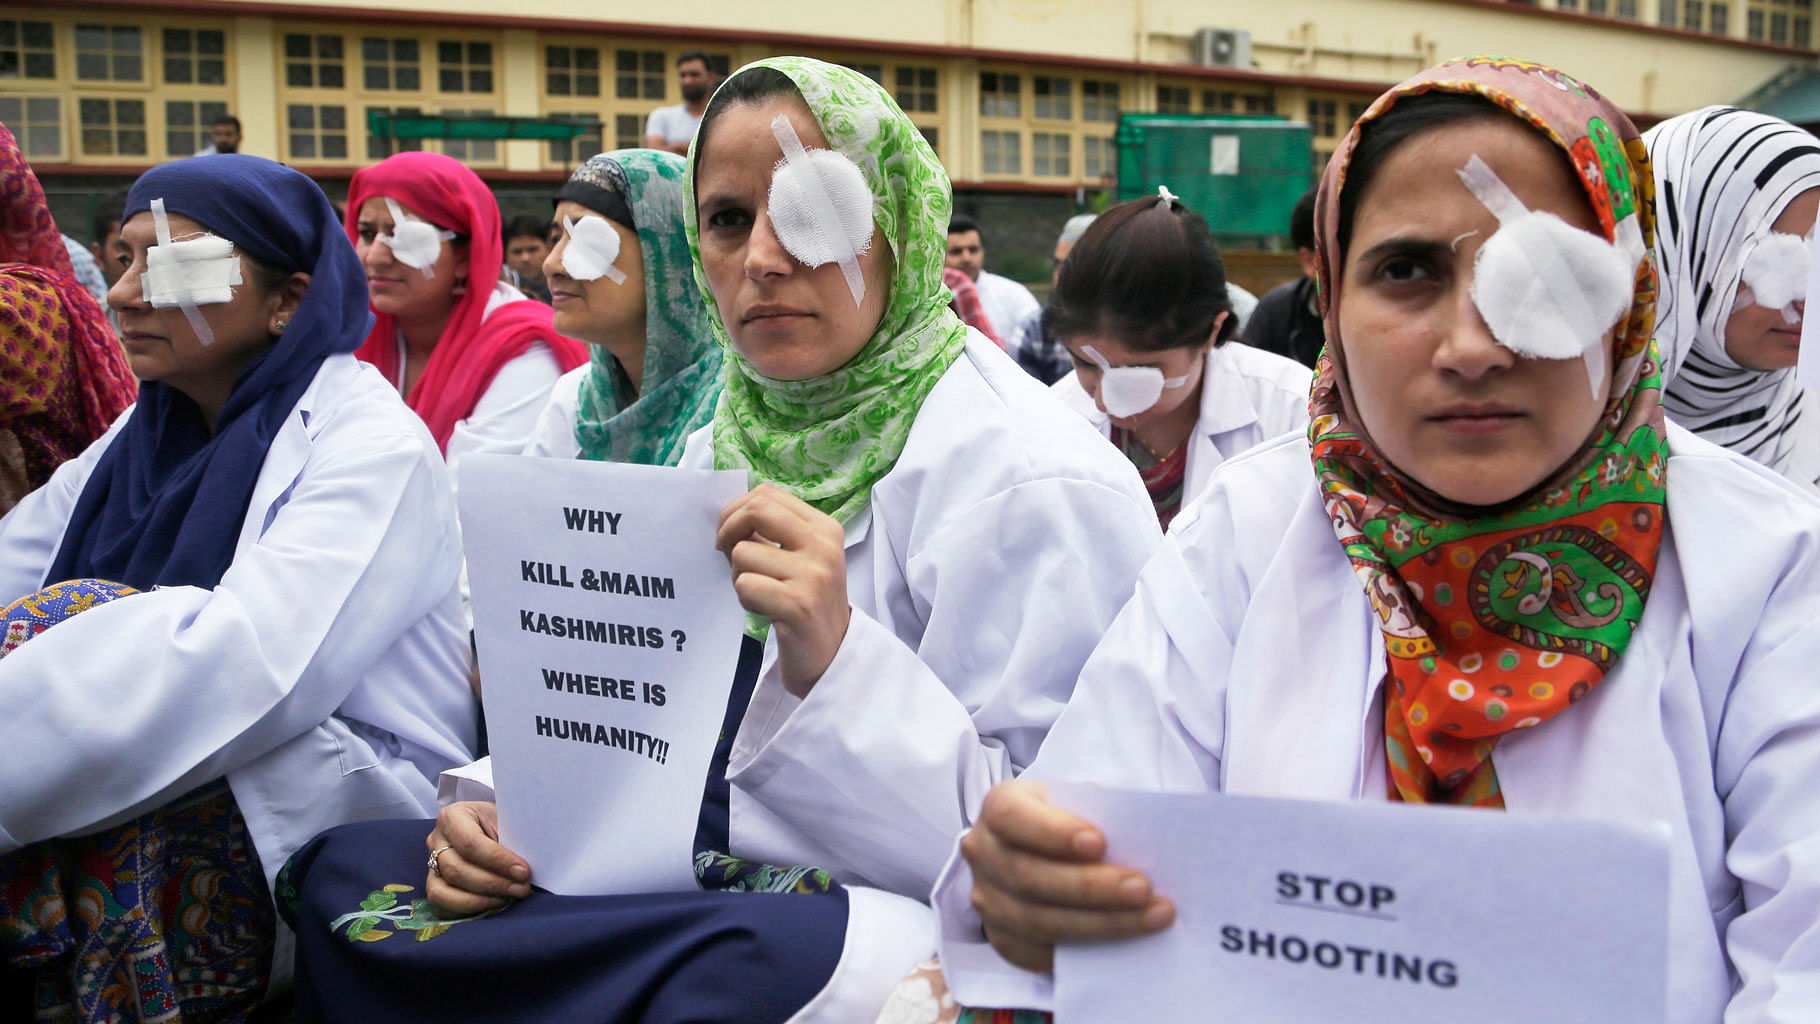 

Kashmiri doctors and medical workers wear bandages on their eyes as a mark of protest against the use of pellet guns and recent killings in Srinagar. (Photo: AP)